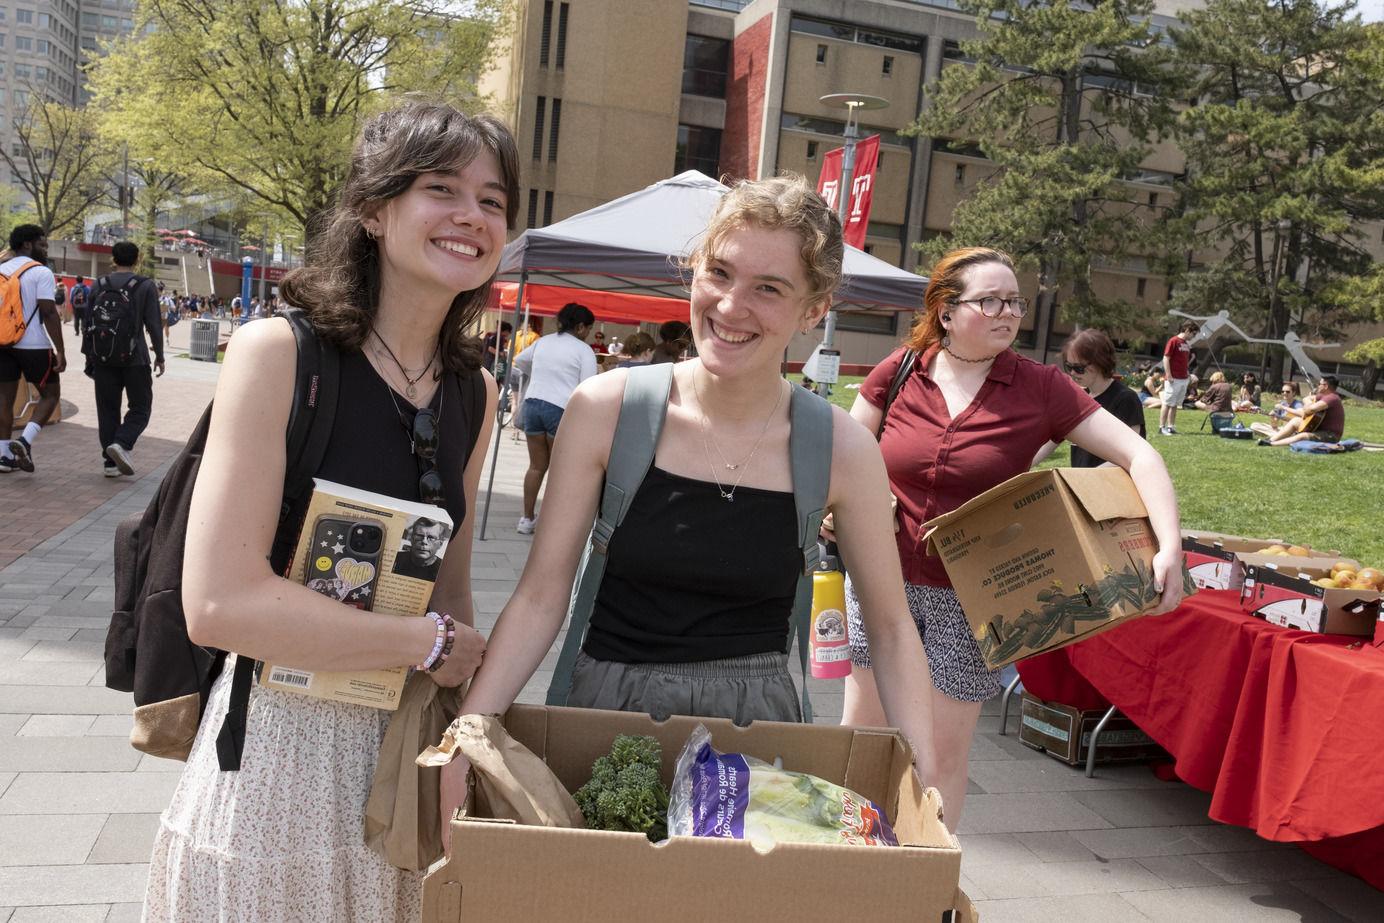 An image of two students smiling after the Share Fair event.